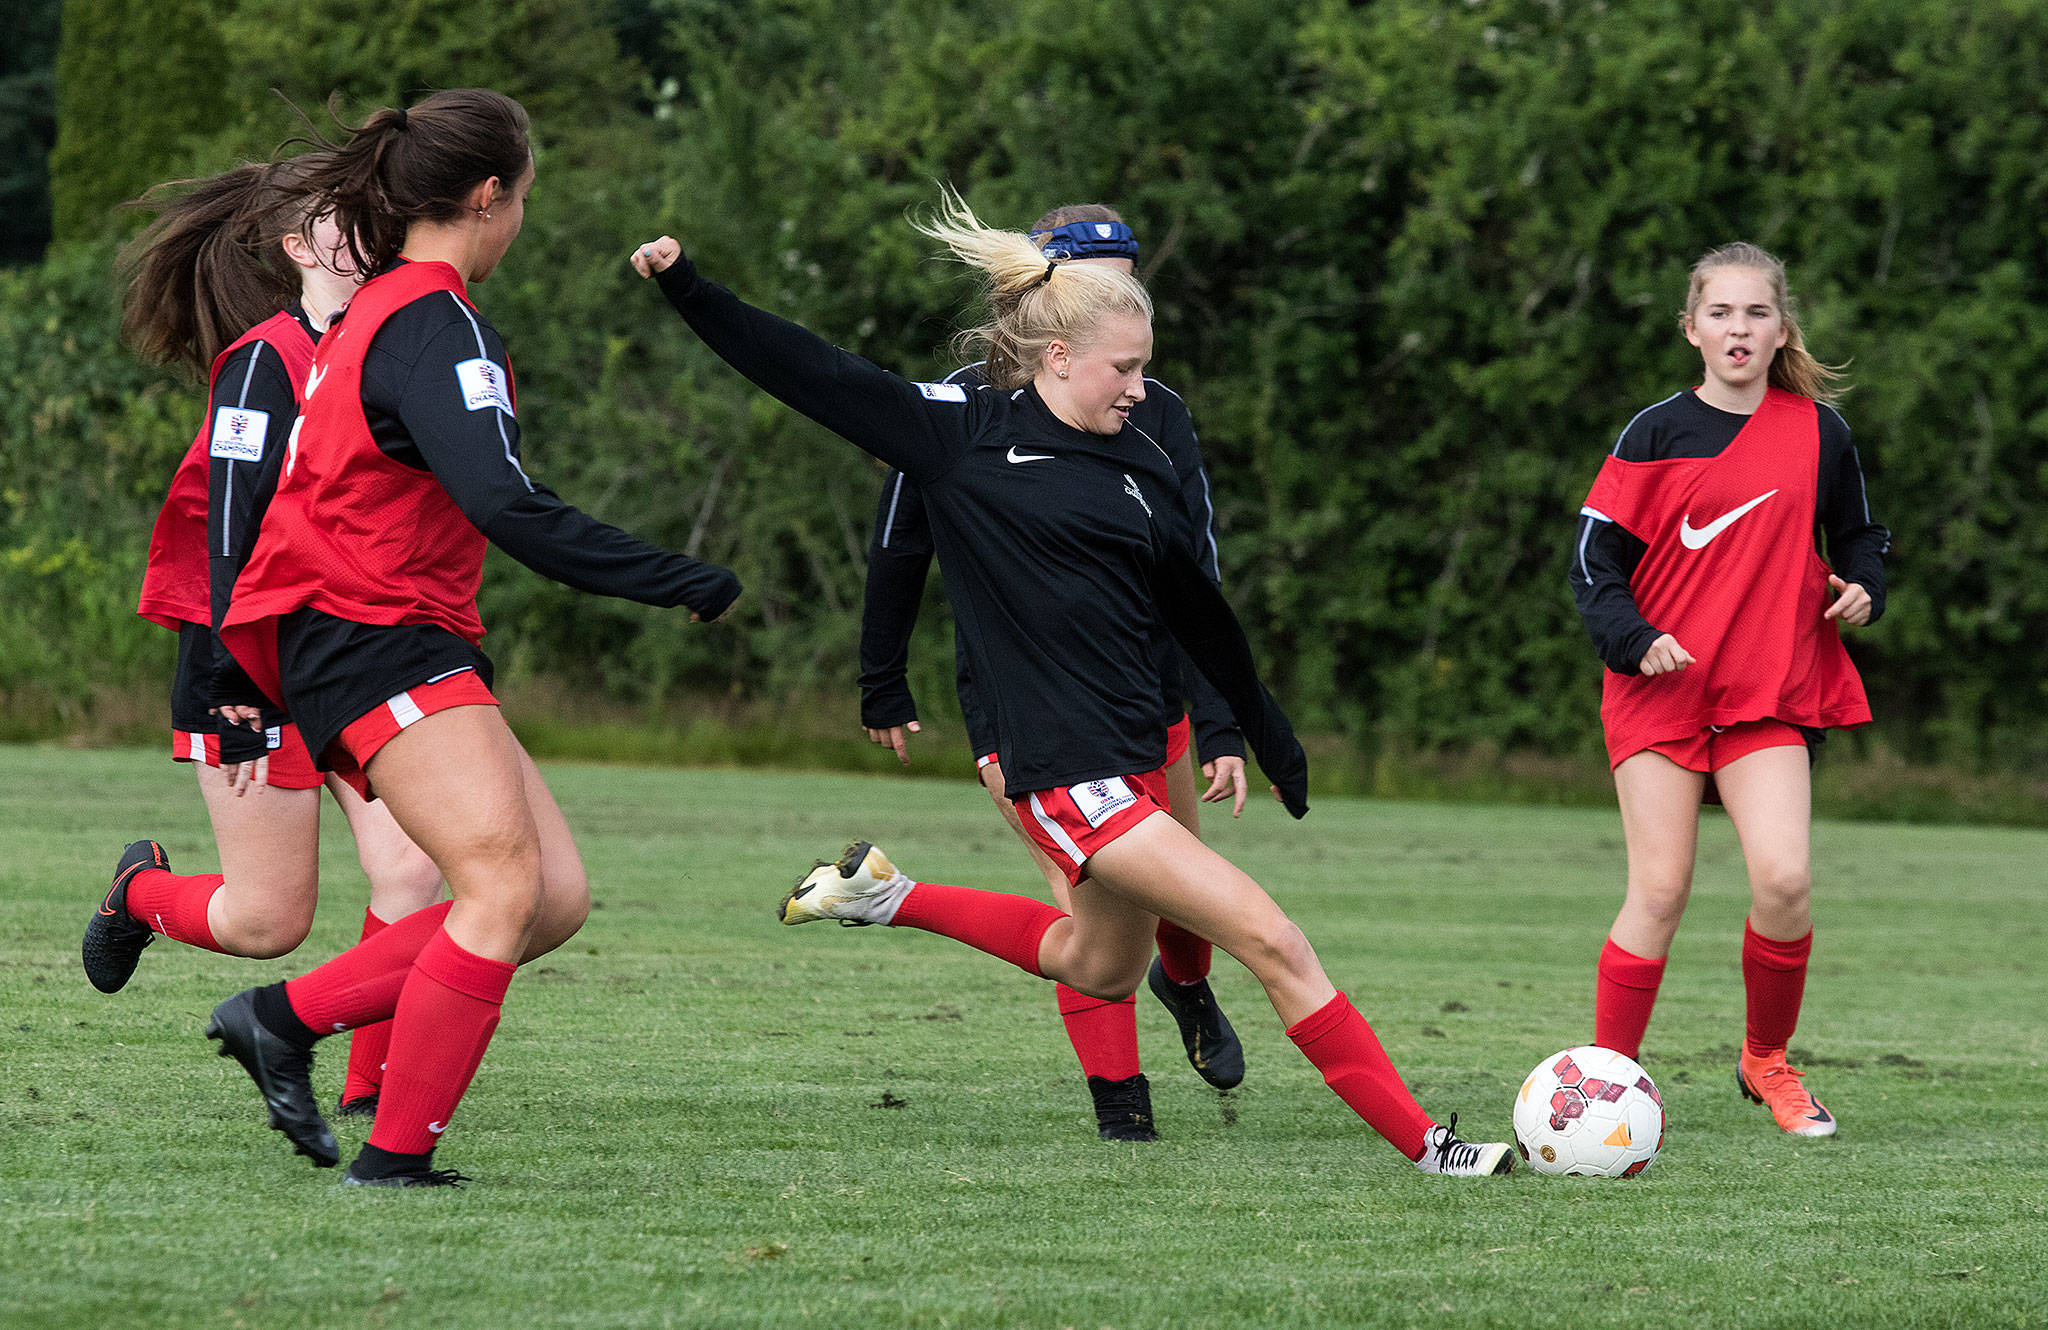 Snohomish United’s Kirsten Crane (center) takes a shot at goal during a July 11 practice at Stocker Fields in Snohomish. Crane netted nine goals while helping Snohomish United G05 Black win a Far West regional title to earn a spot in the U.S. Youth Soccer National Championships. (Andy Bronson / The Herald)